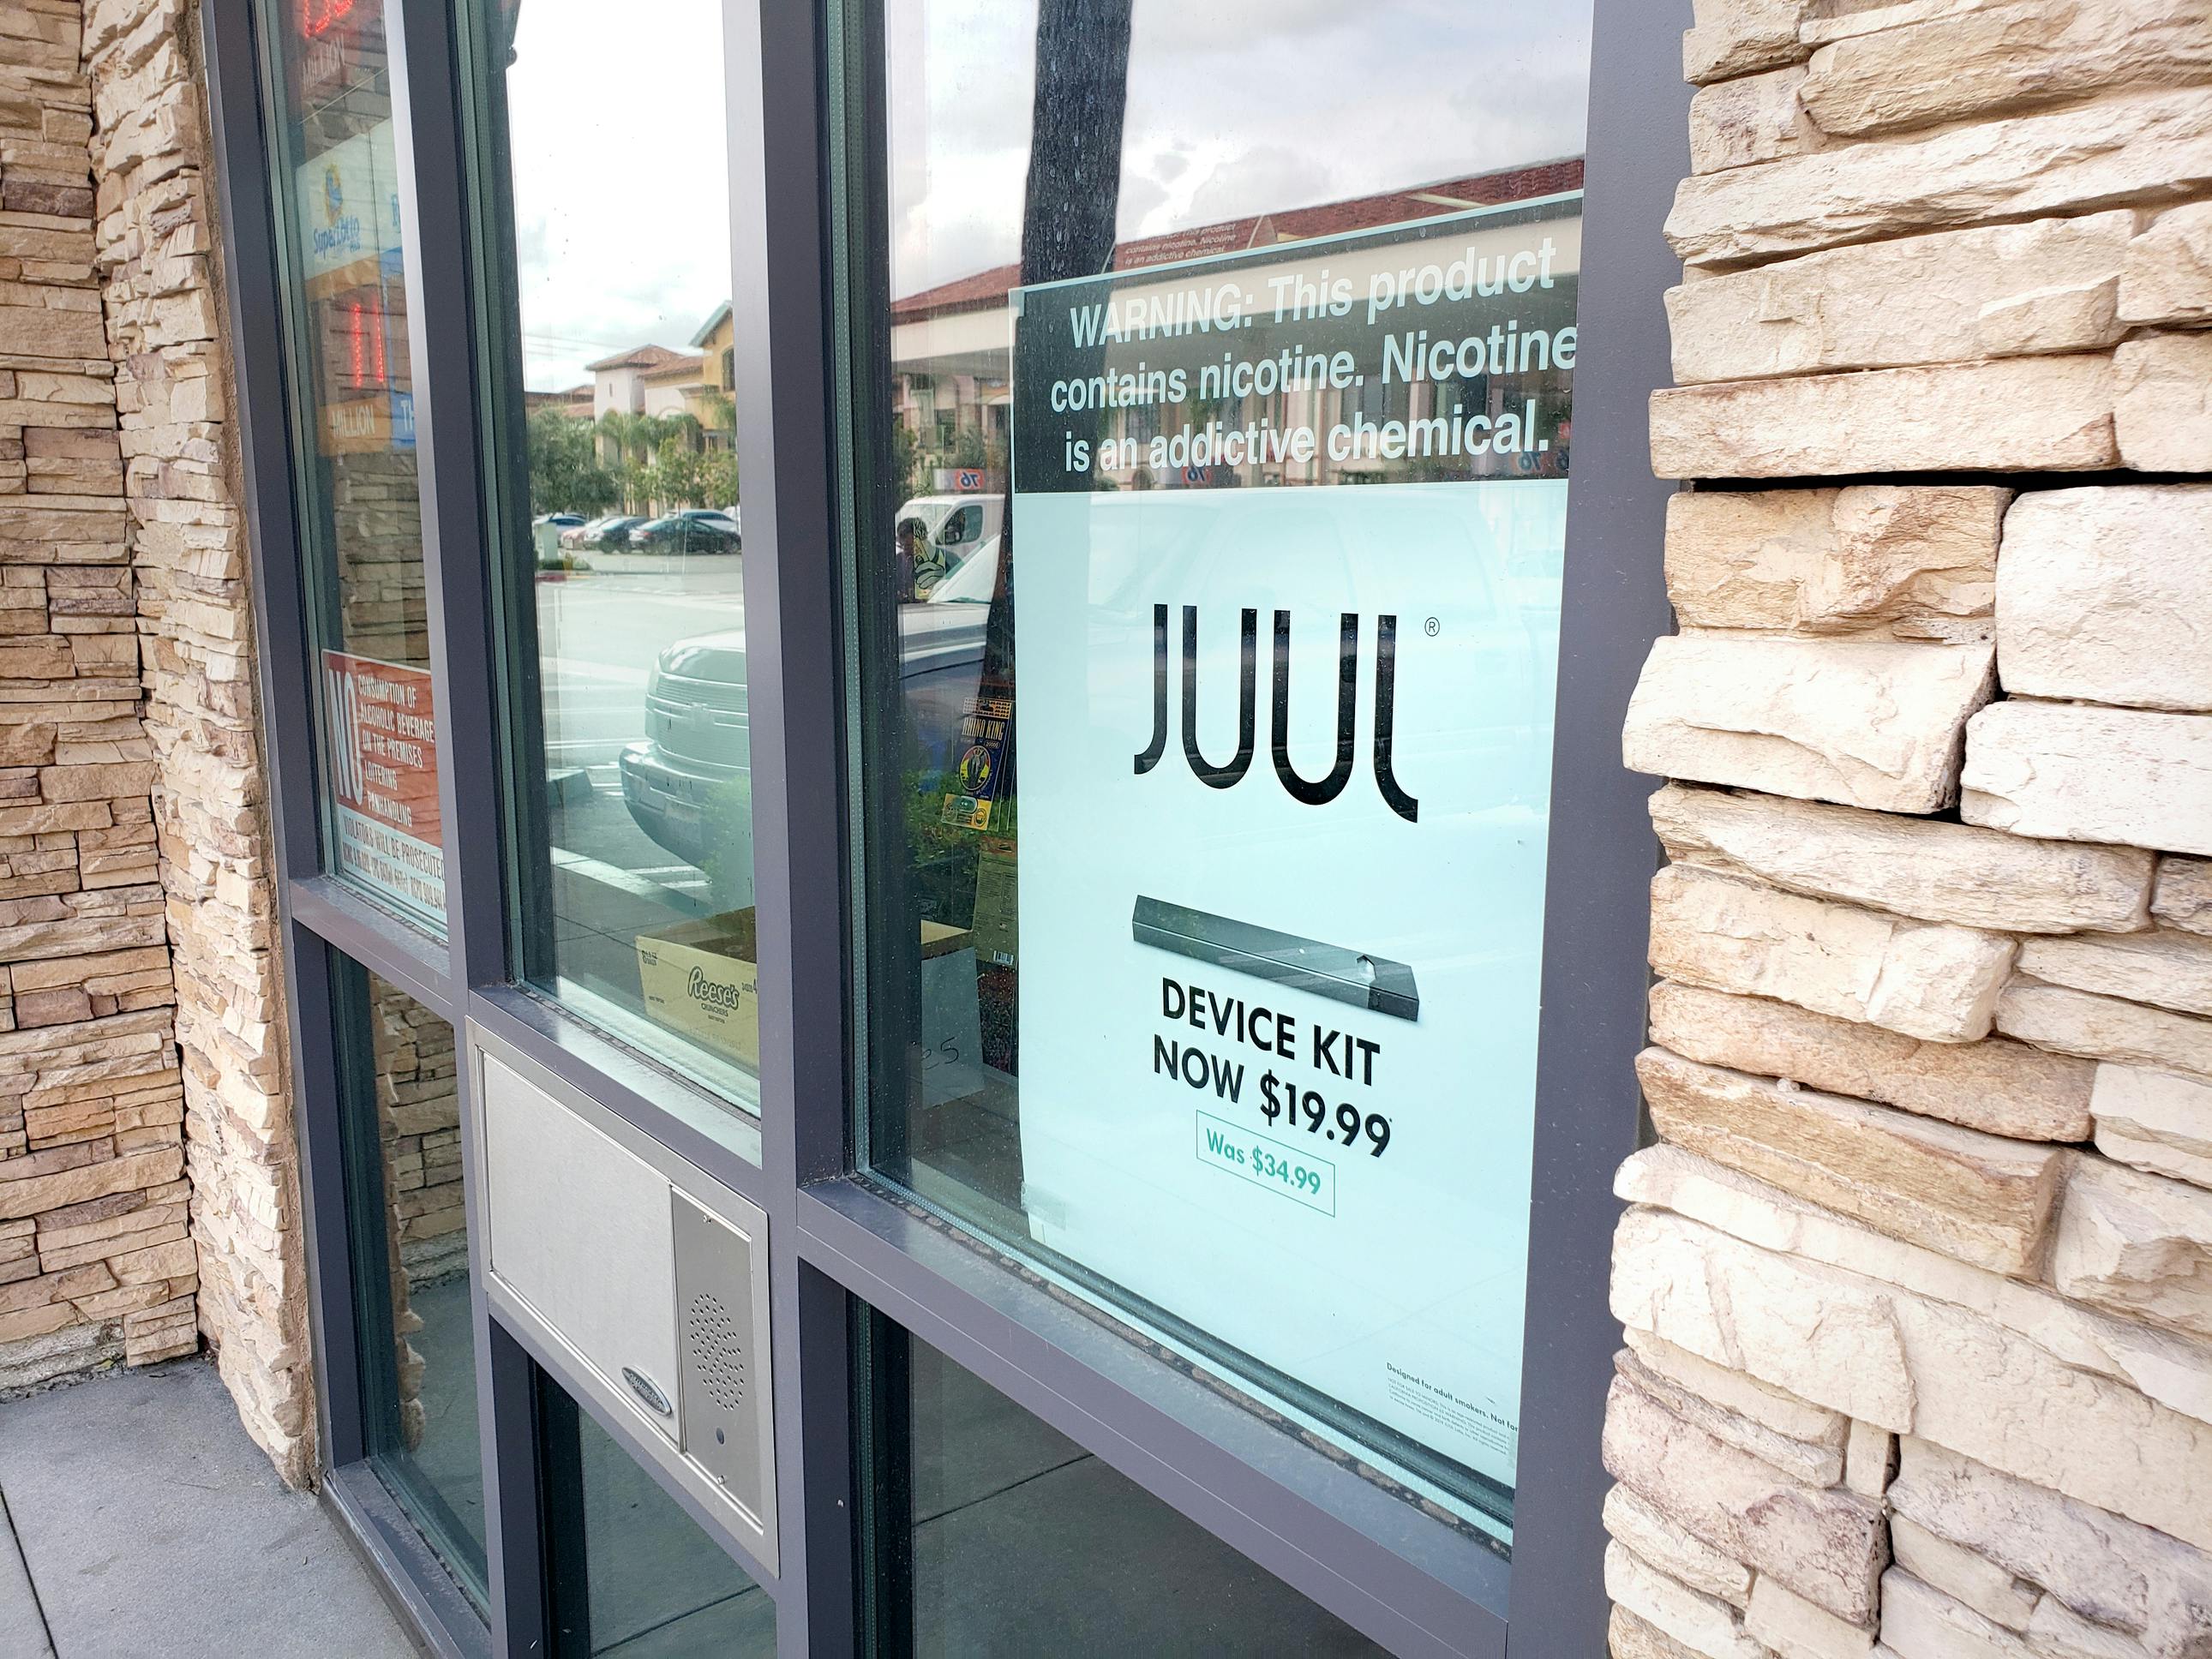 A sign outside a convenience store advertising Juul e-cigarettes.